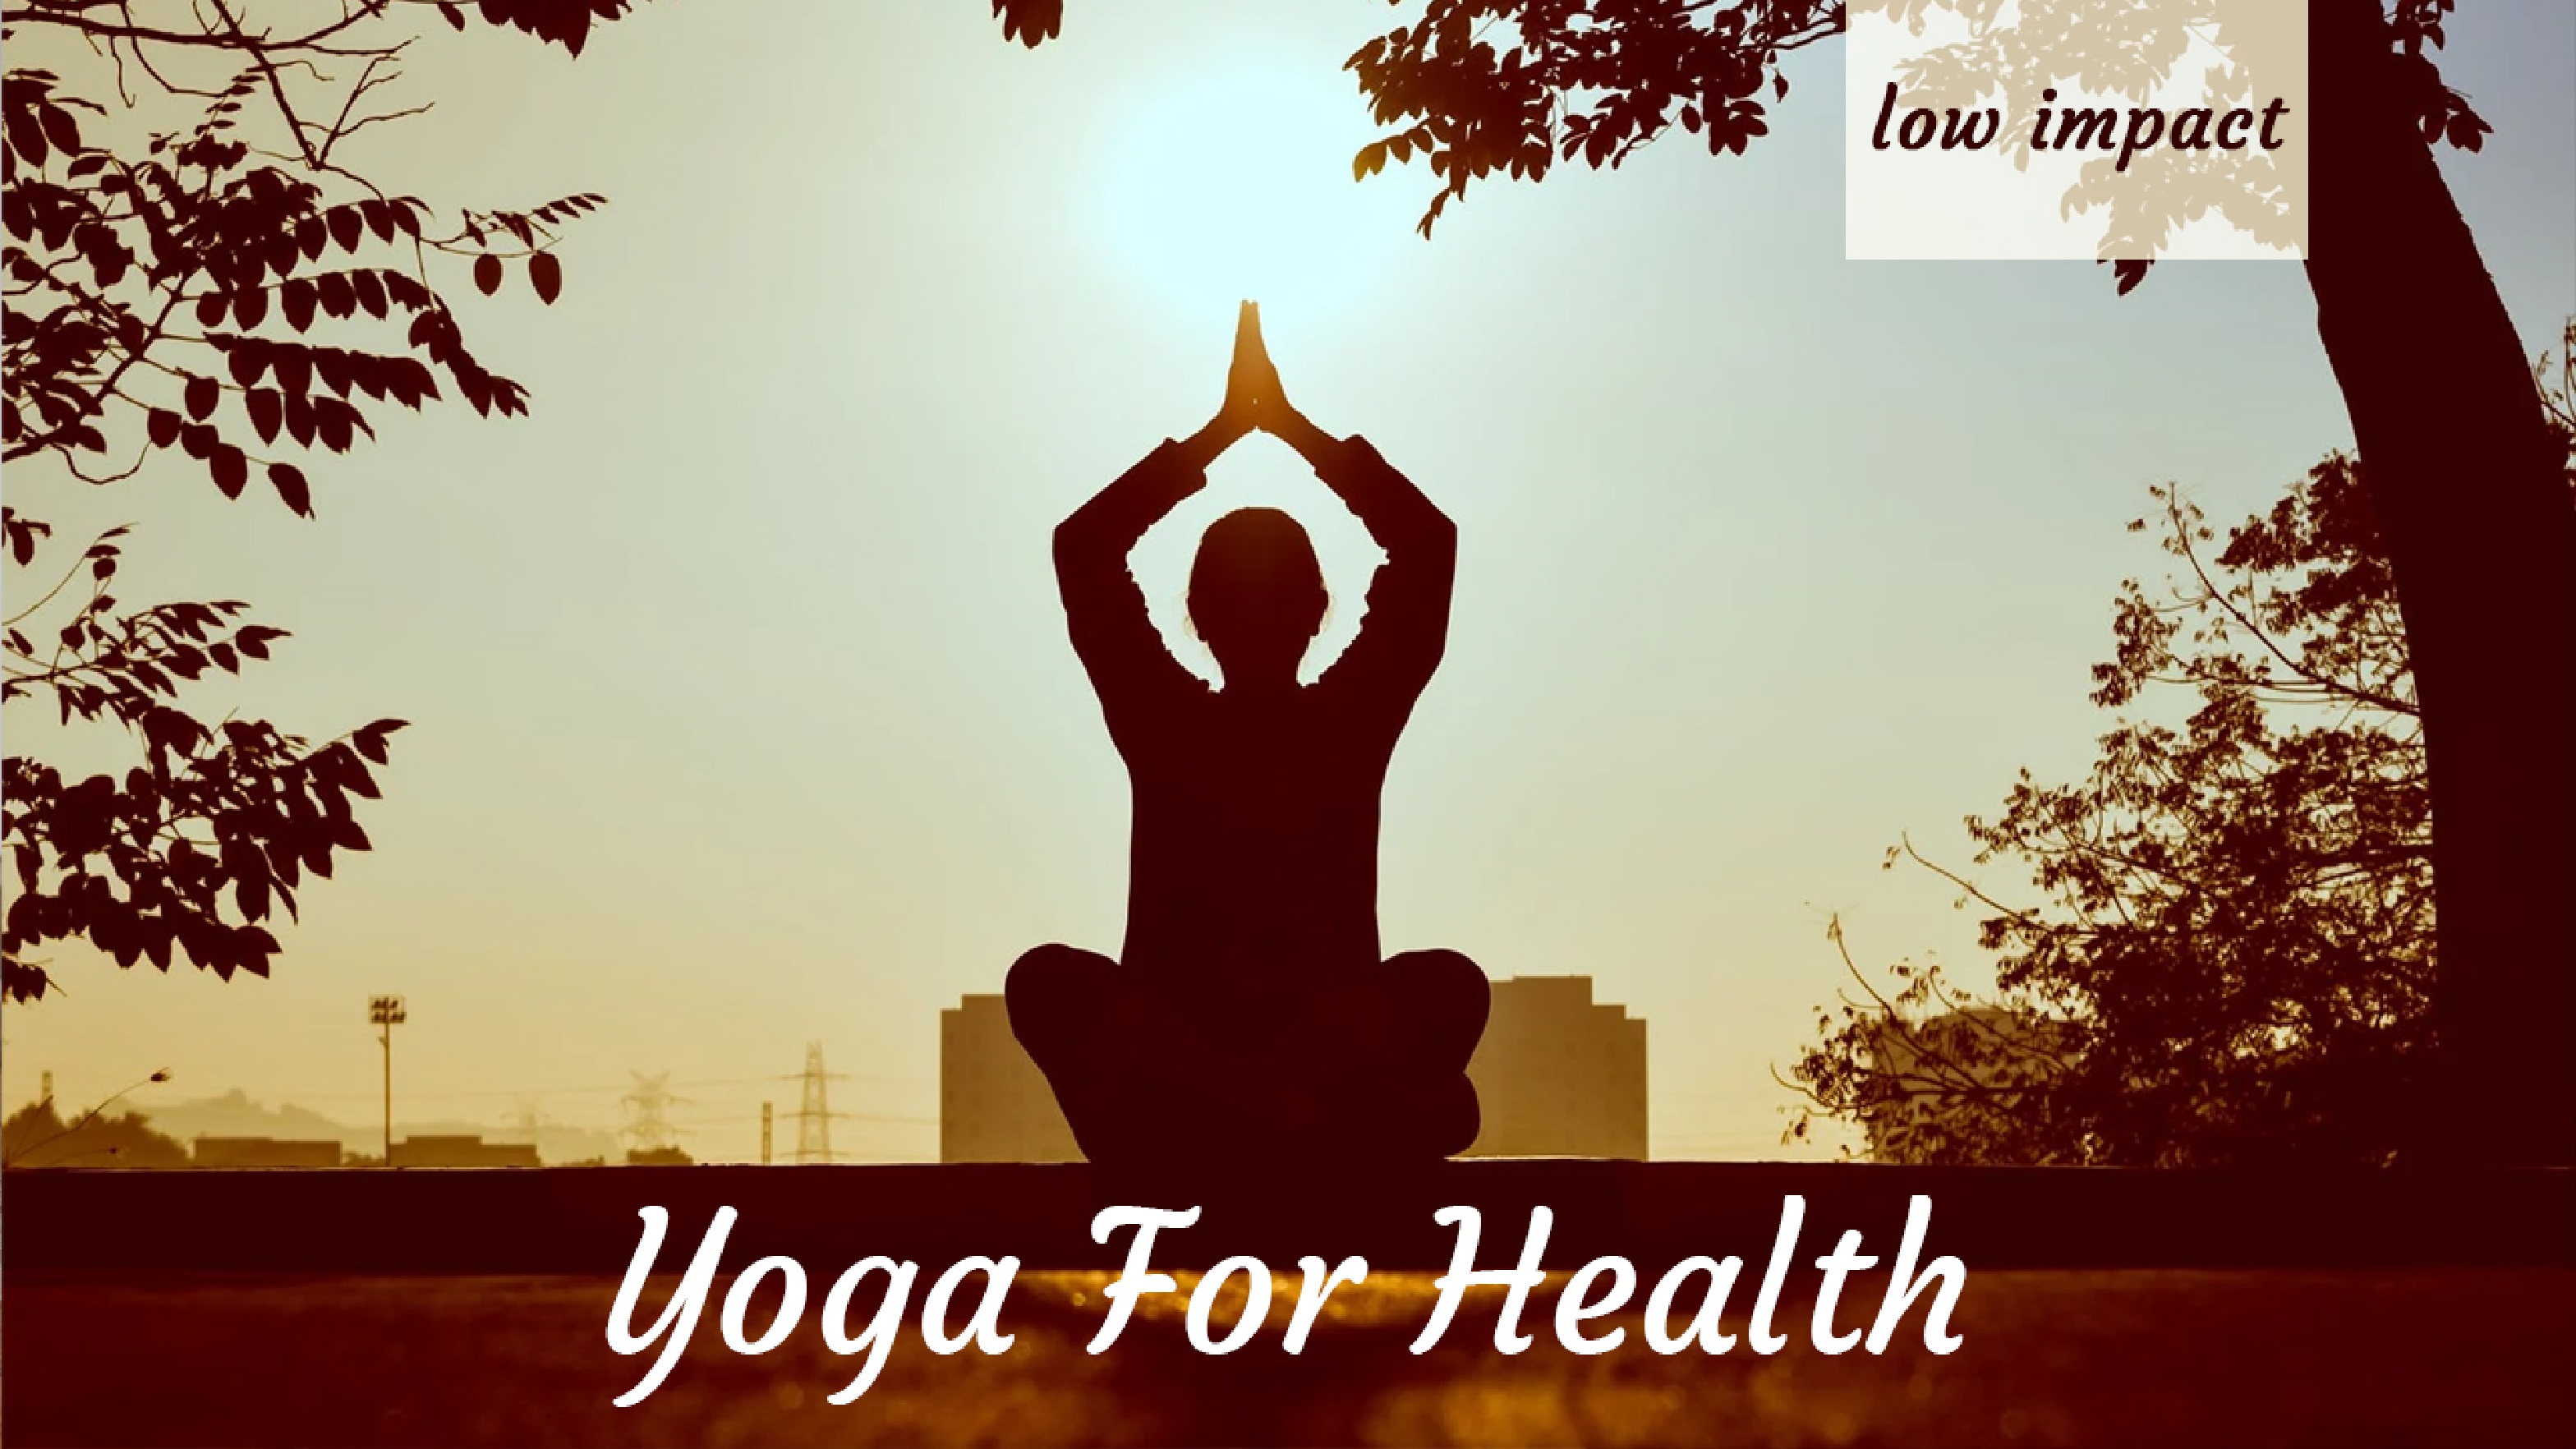 Western science is starting to provide some concrete clues as to how yoga works to improve health, heal aches and pains, and keep sickness at bay.